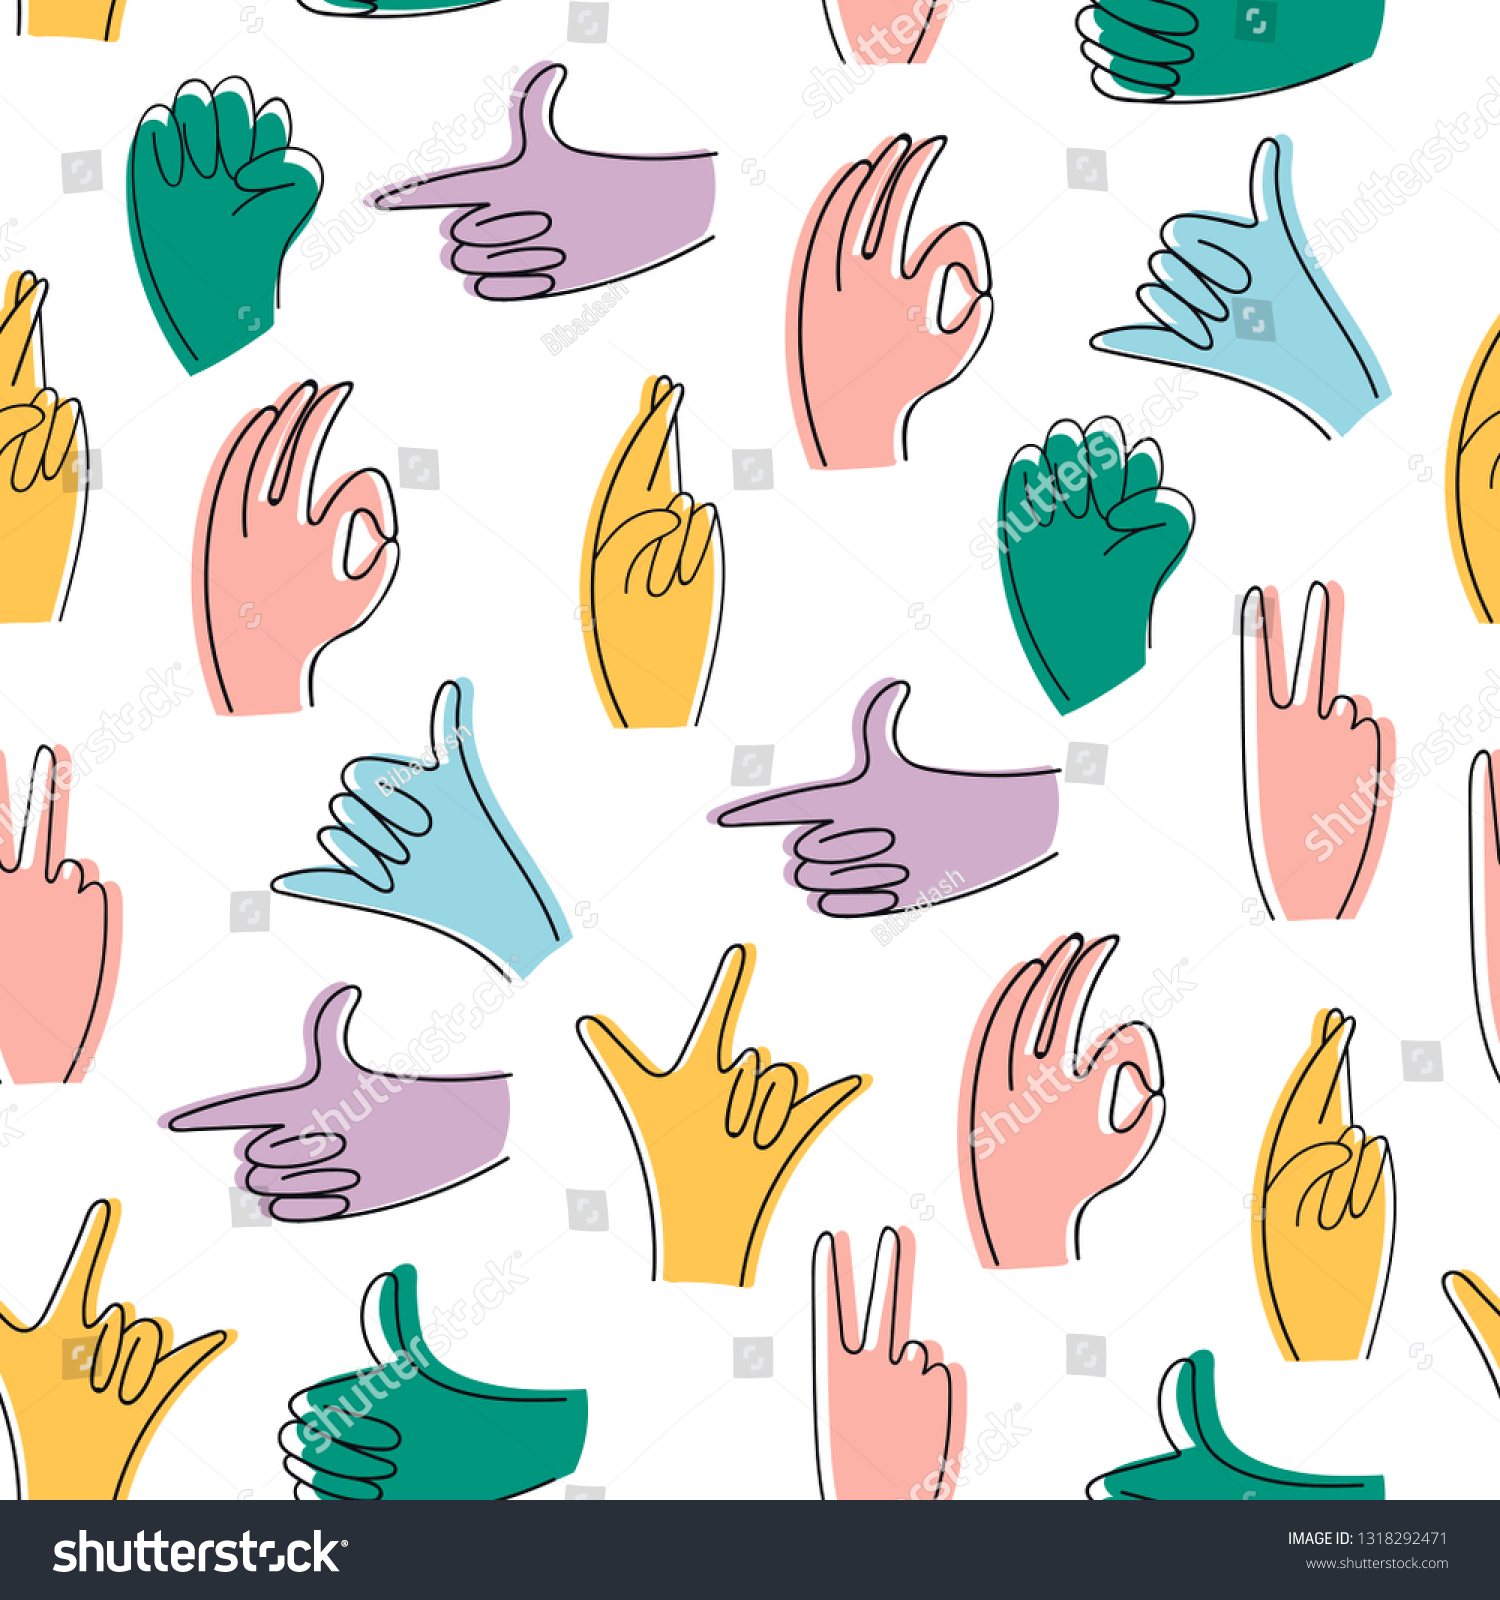 Popular hand gestures. Trendy colored icons Royalty Free Stock Vector